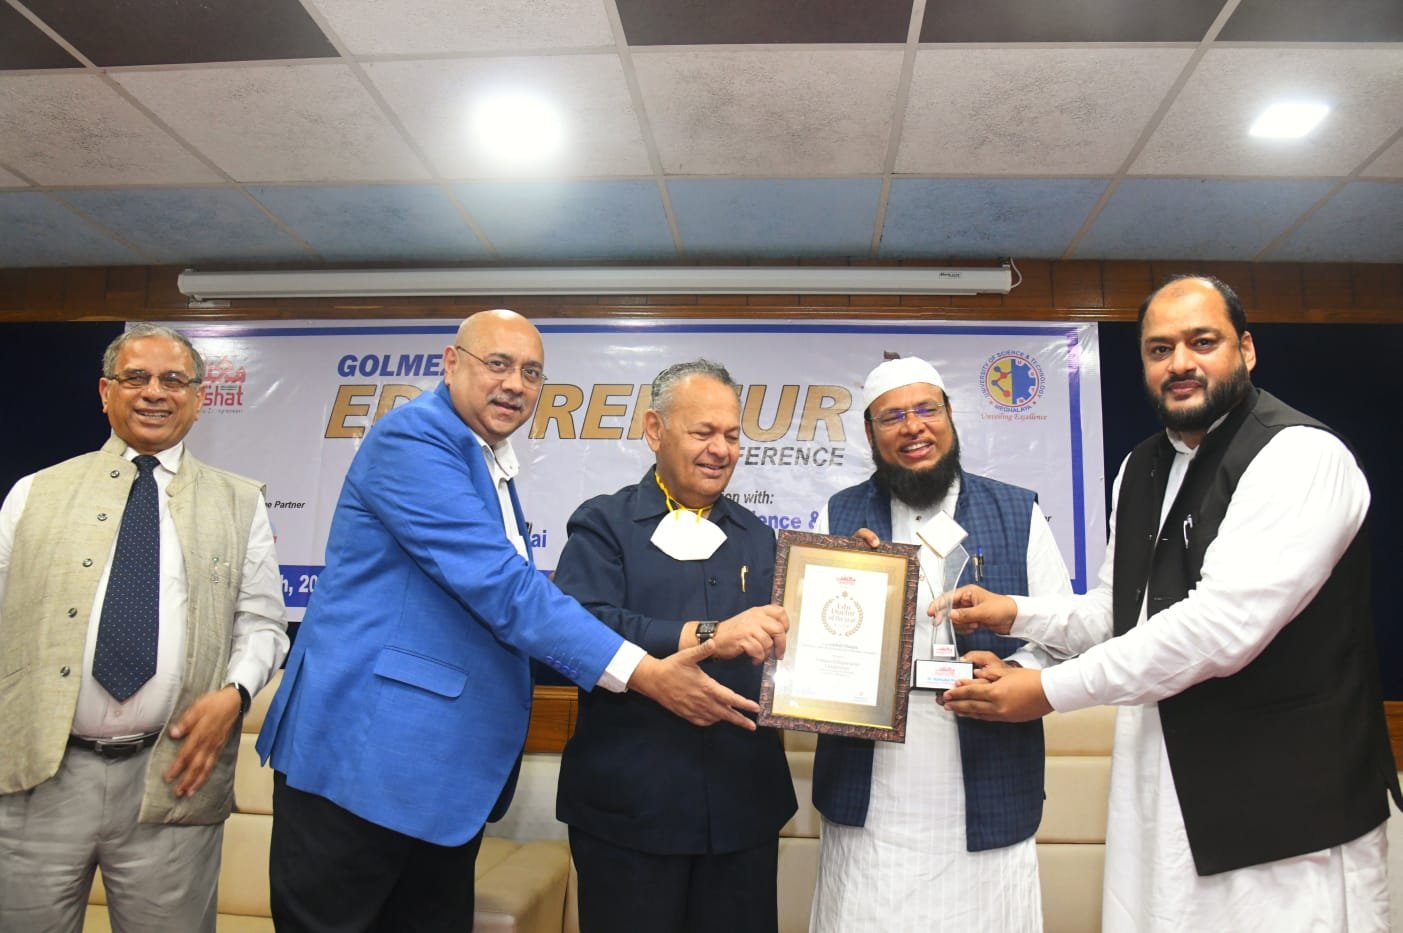 Mahbubul Hoque, Chancellor of USTM receiving Maeeshat Edu Doctor Award-2022 from the hands of P. A. Inamdar, Founder President, Azam Campus, Pune (centre) at Golmez Edupreneur Conference